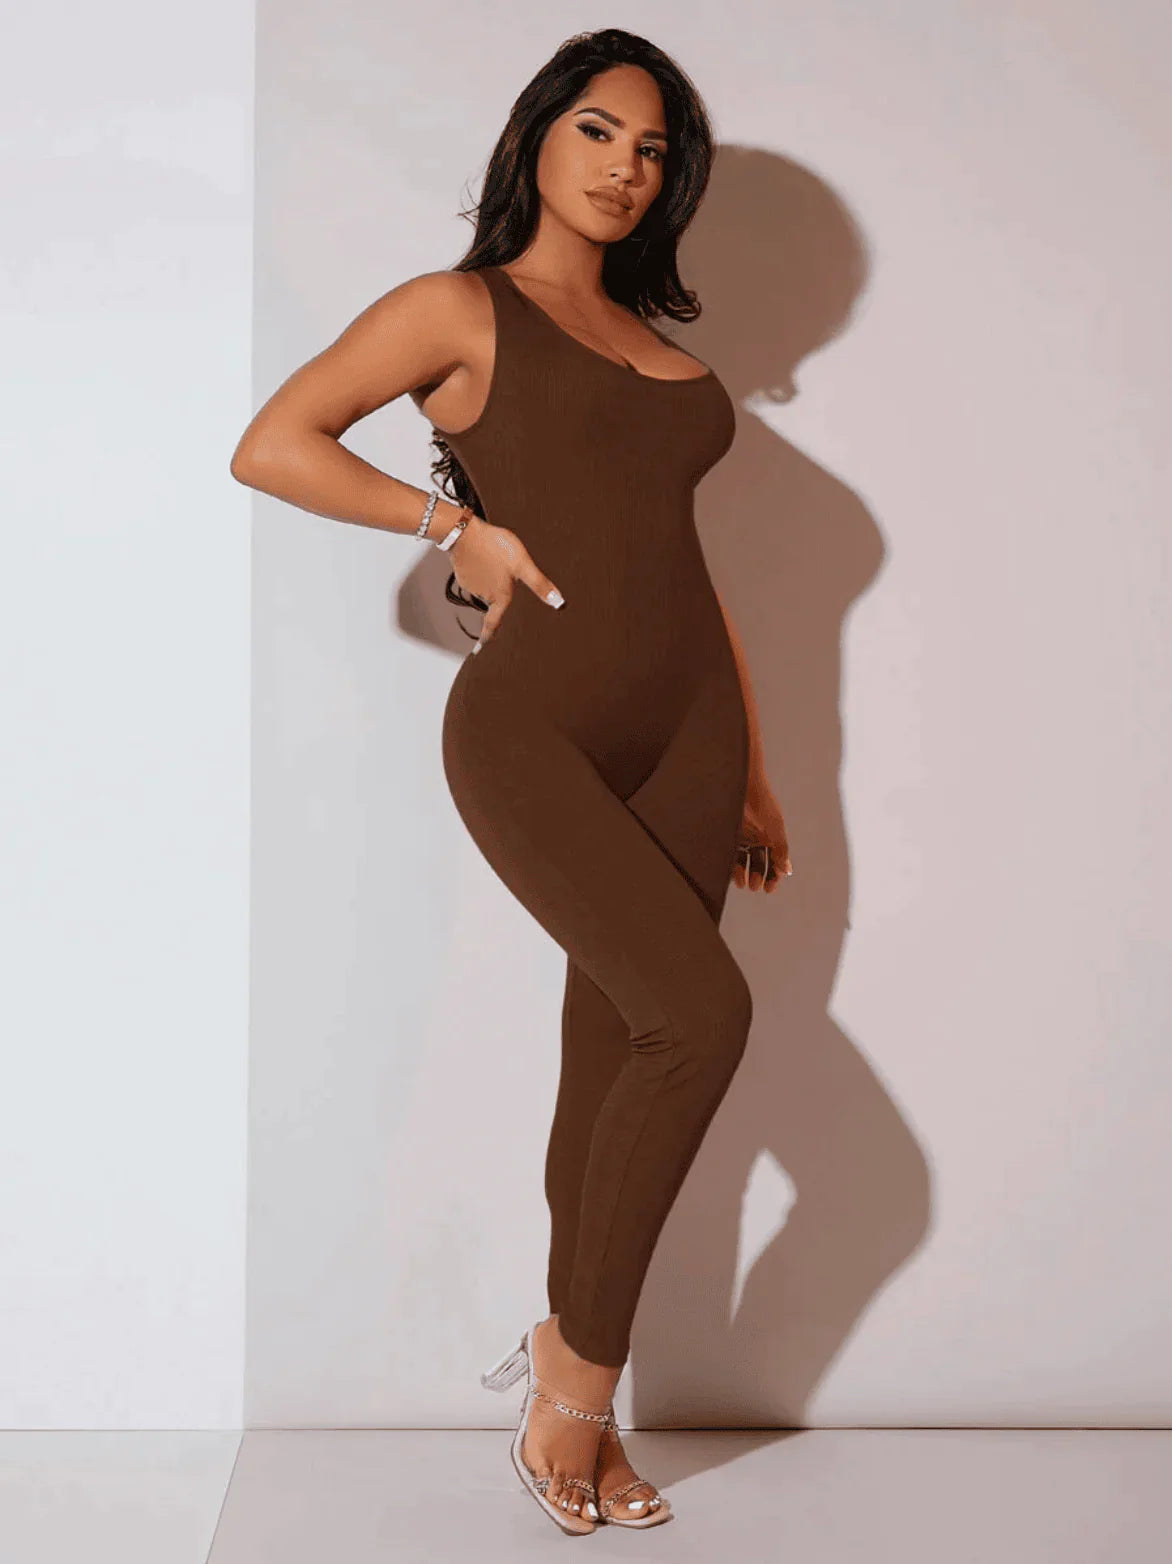 Calliope™ | Built-in Shapewear - One Piece Seamless Coverall